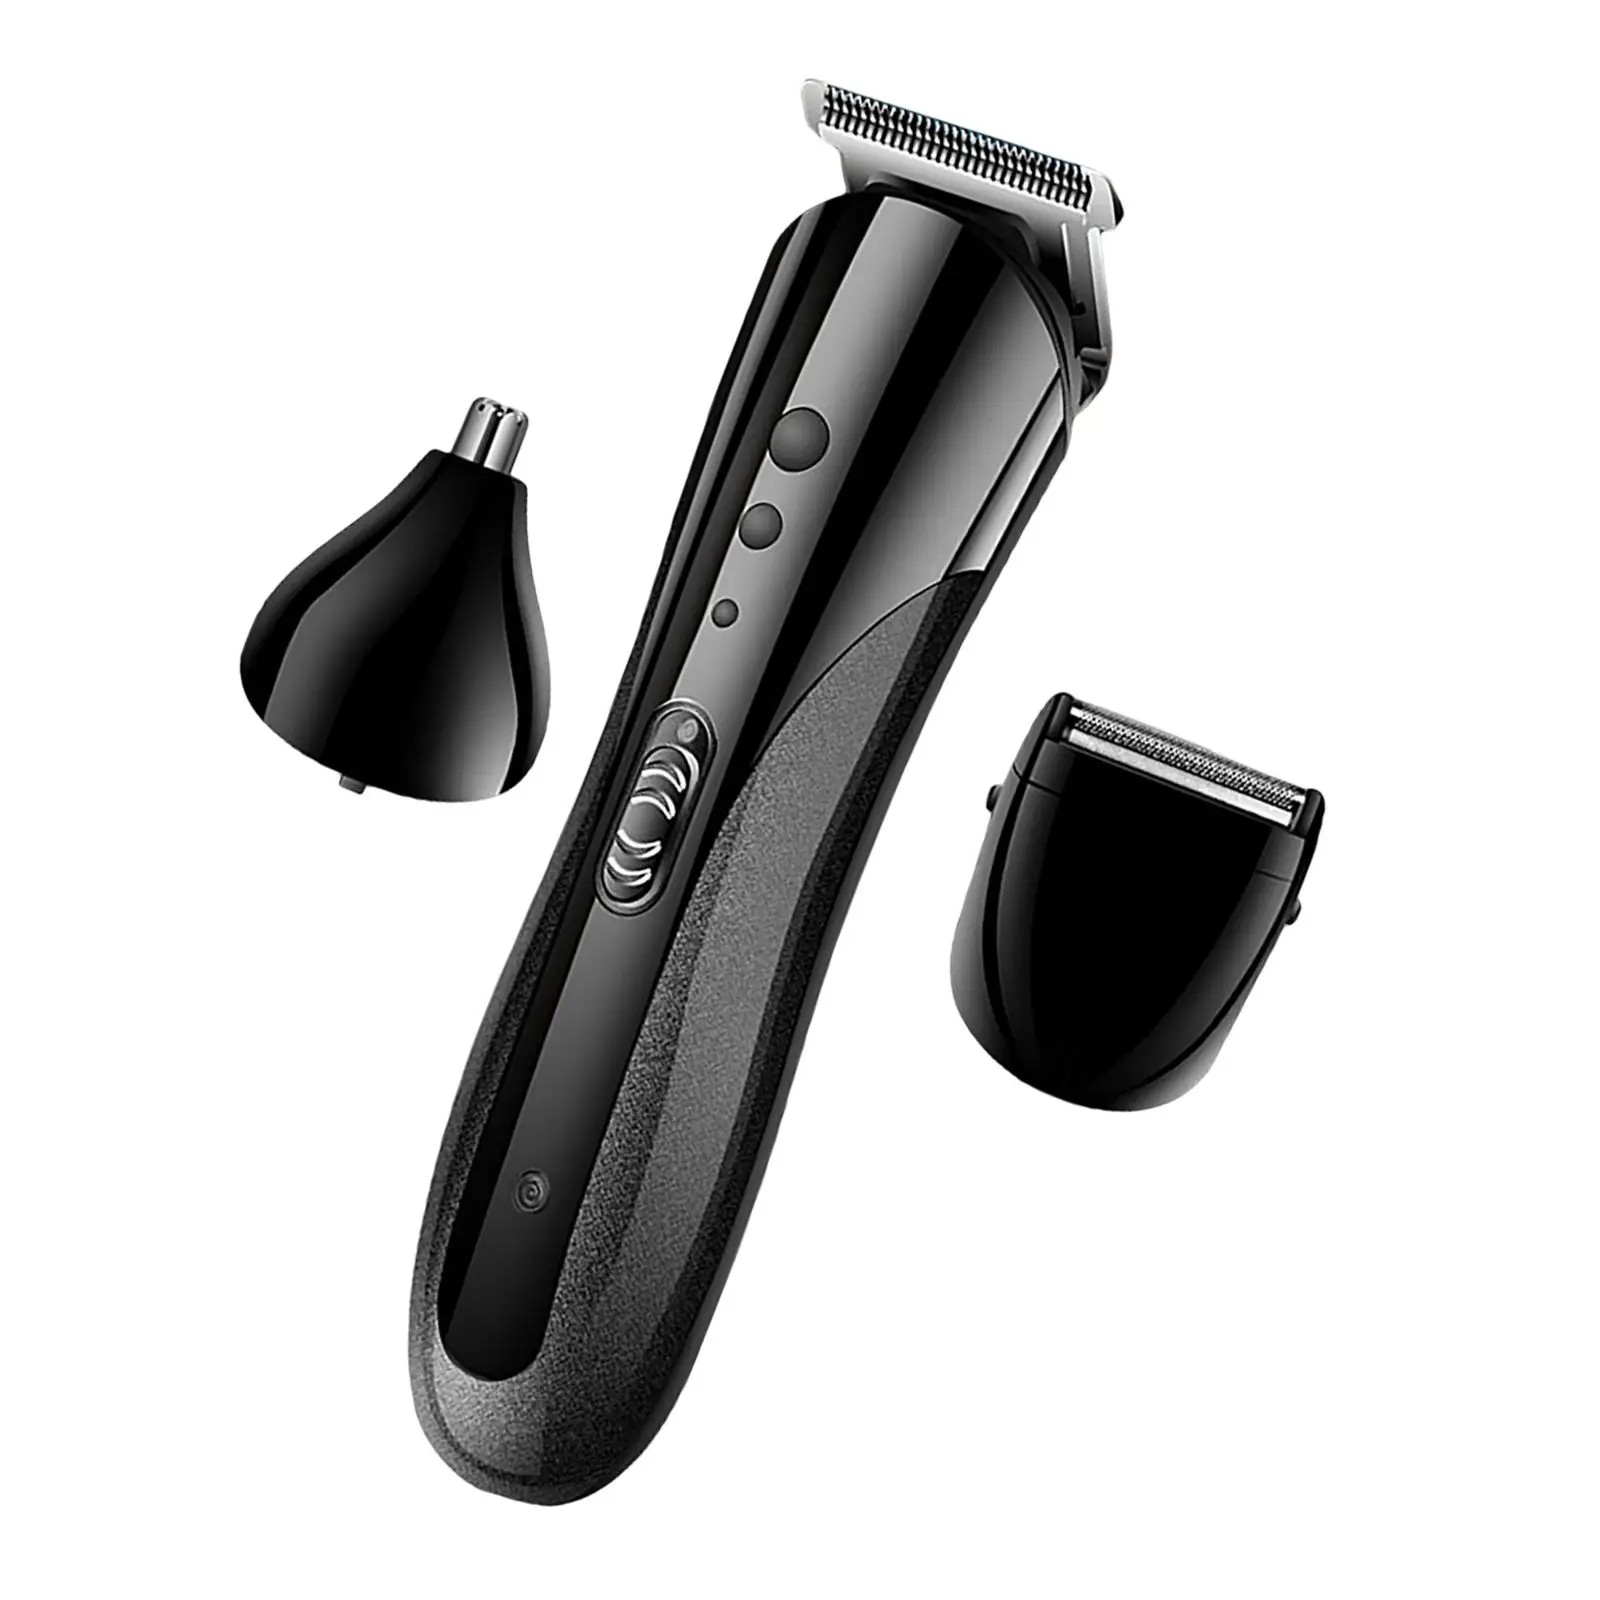 

Hair Clippers Cordless Trimmer USB Charging Plug Type UK , Precise Length Control Carbon Steel Blade Blade Washable Low Nosie